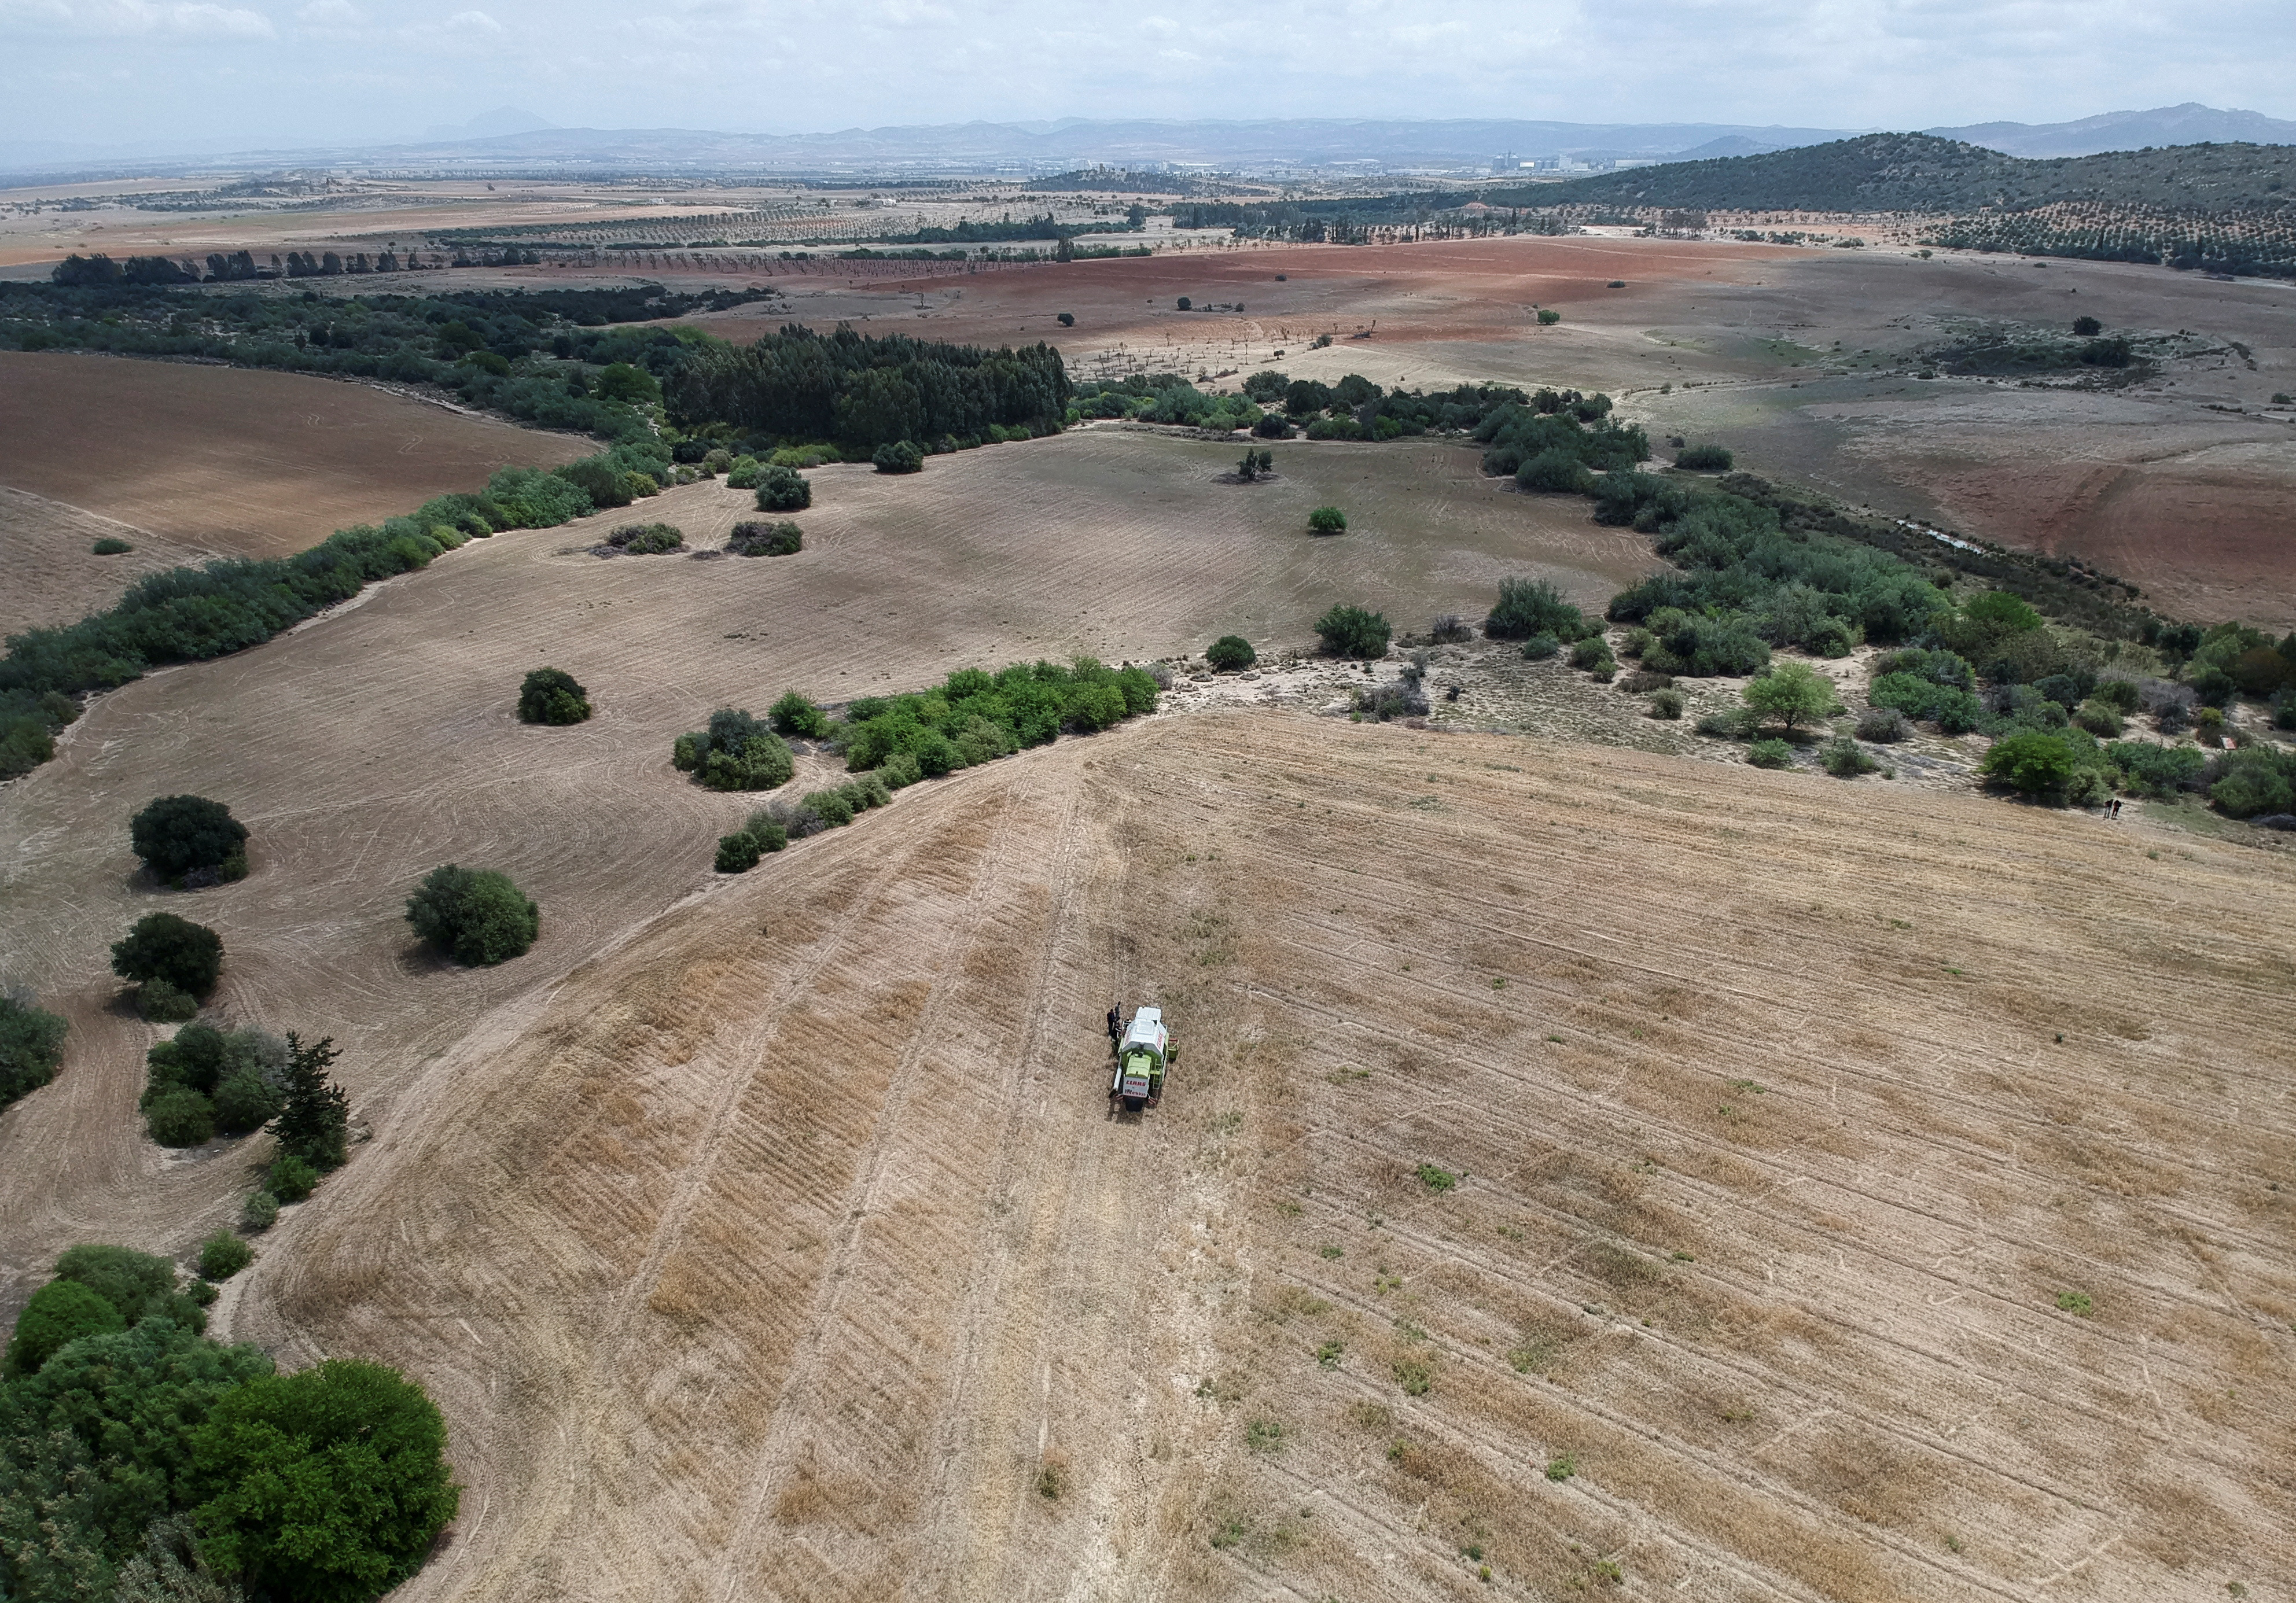 A combine harvests wheat on a field in Manouba